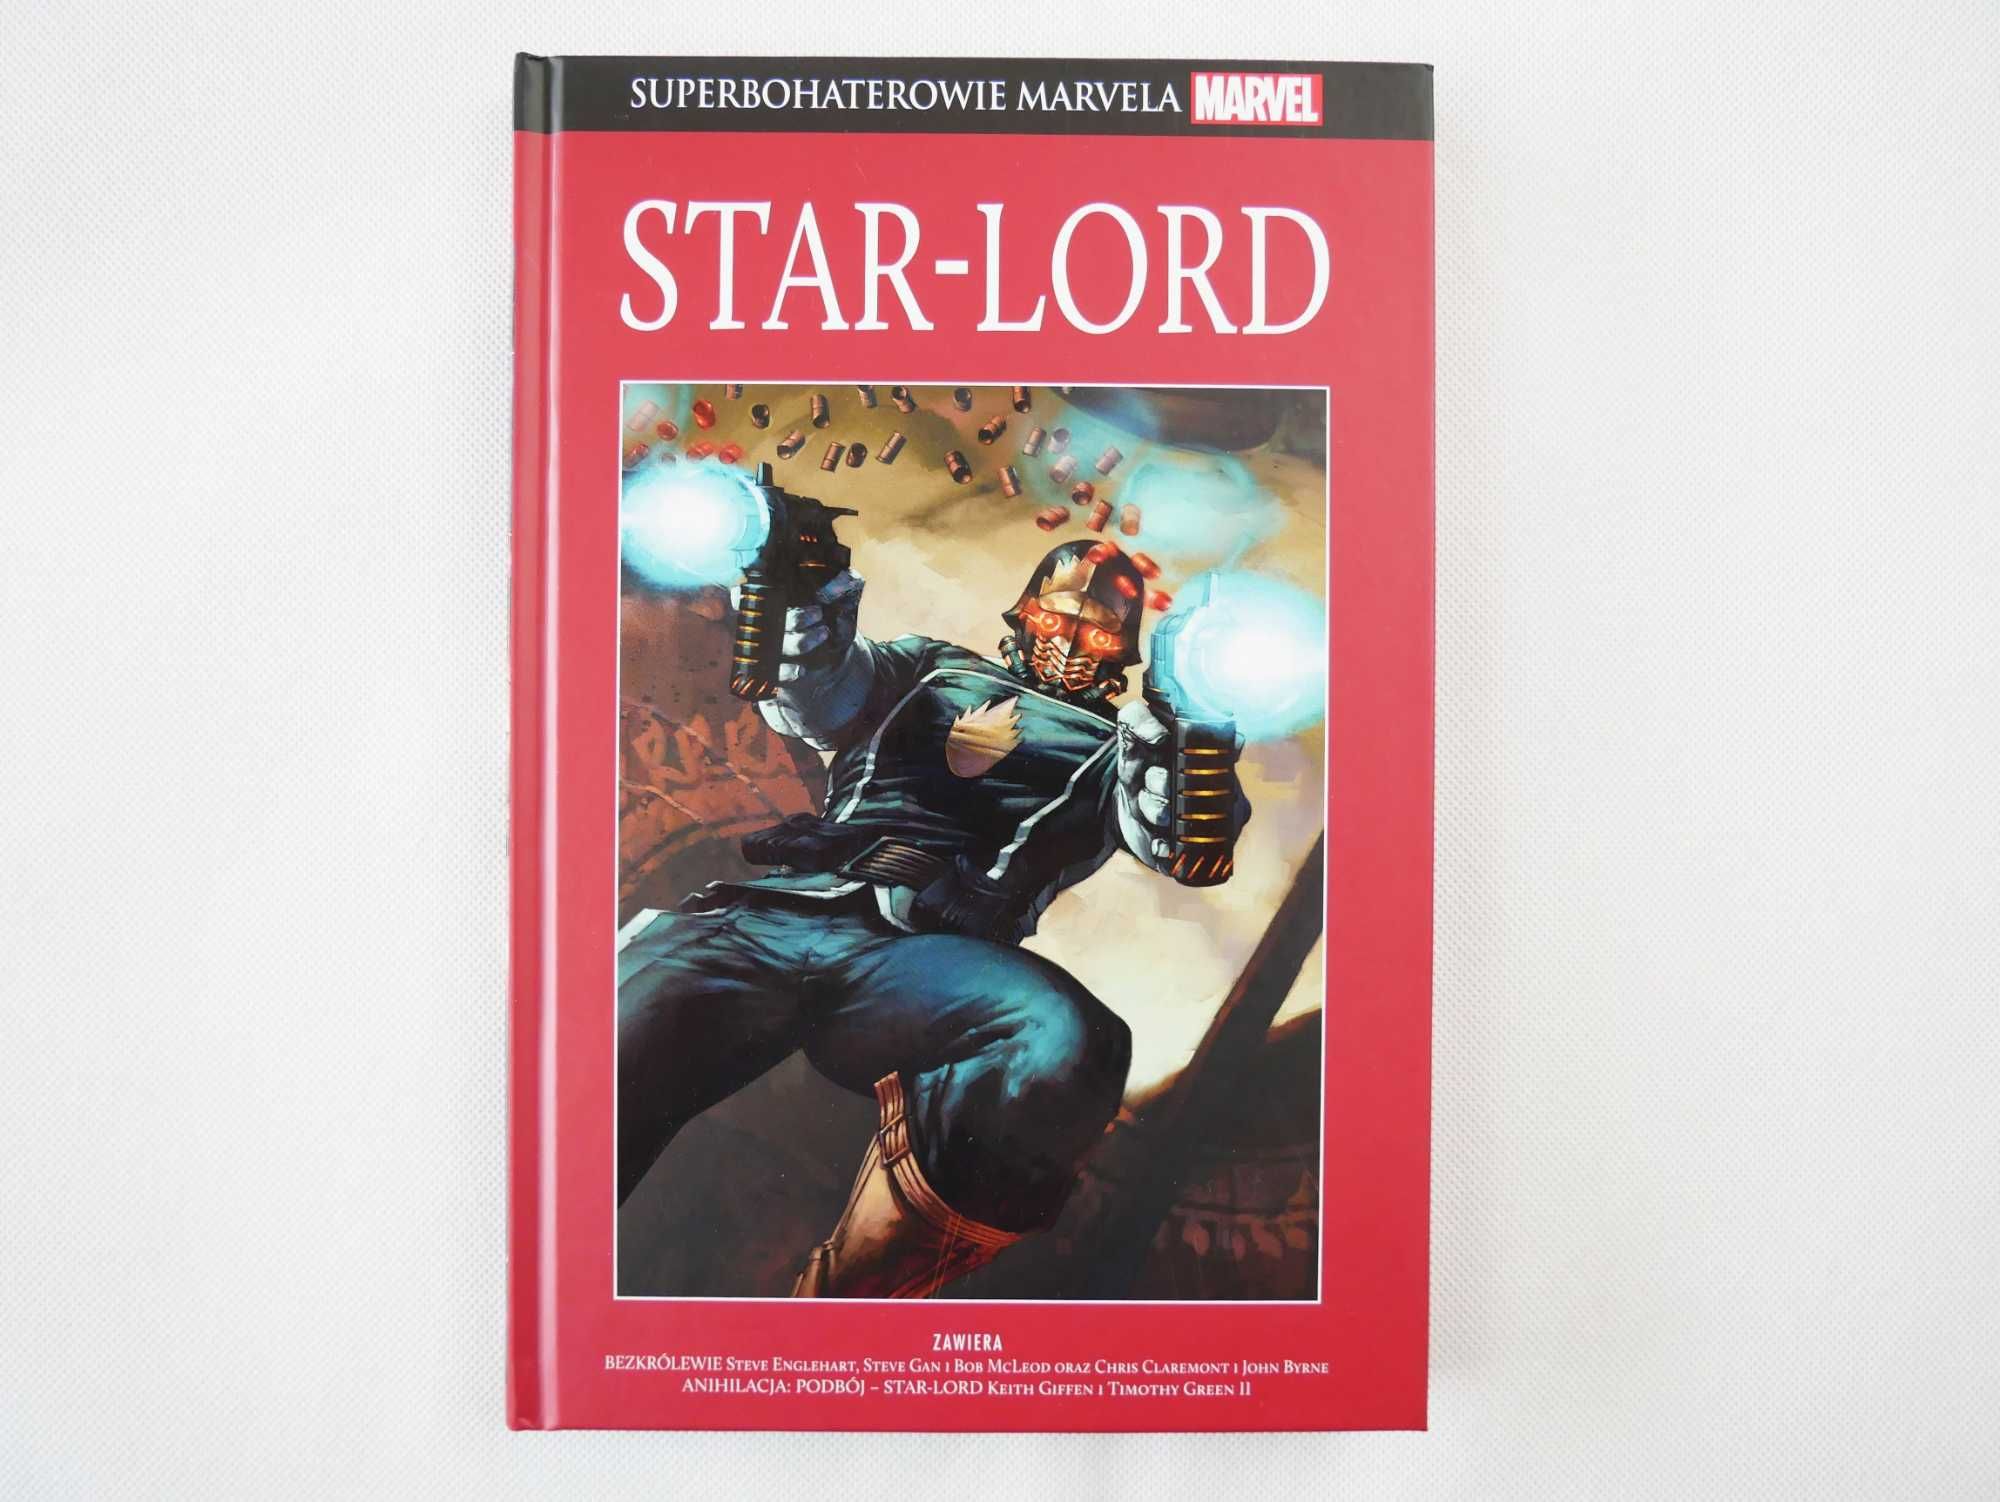 Superbohaterowie Marvela - 43 starlord